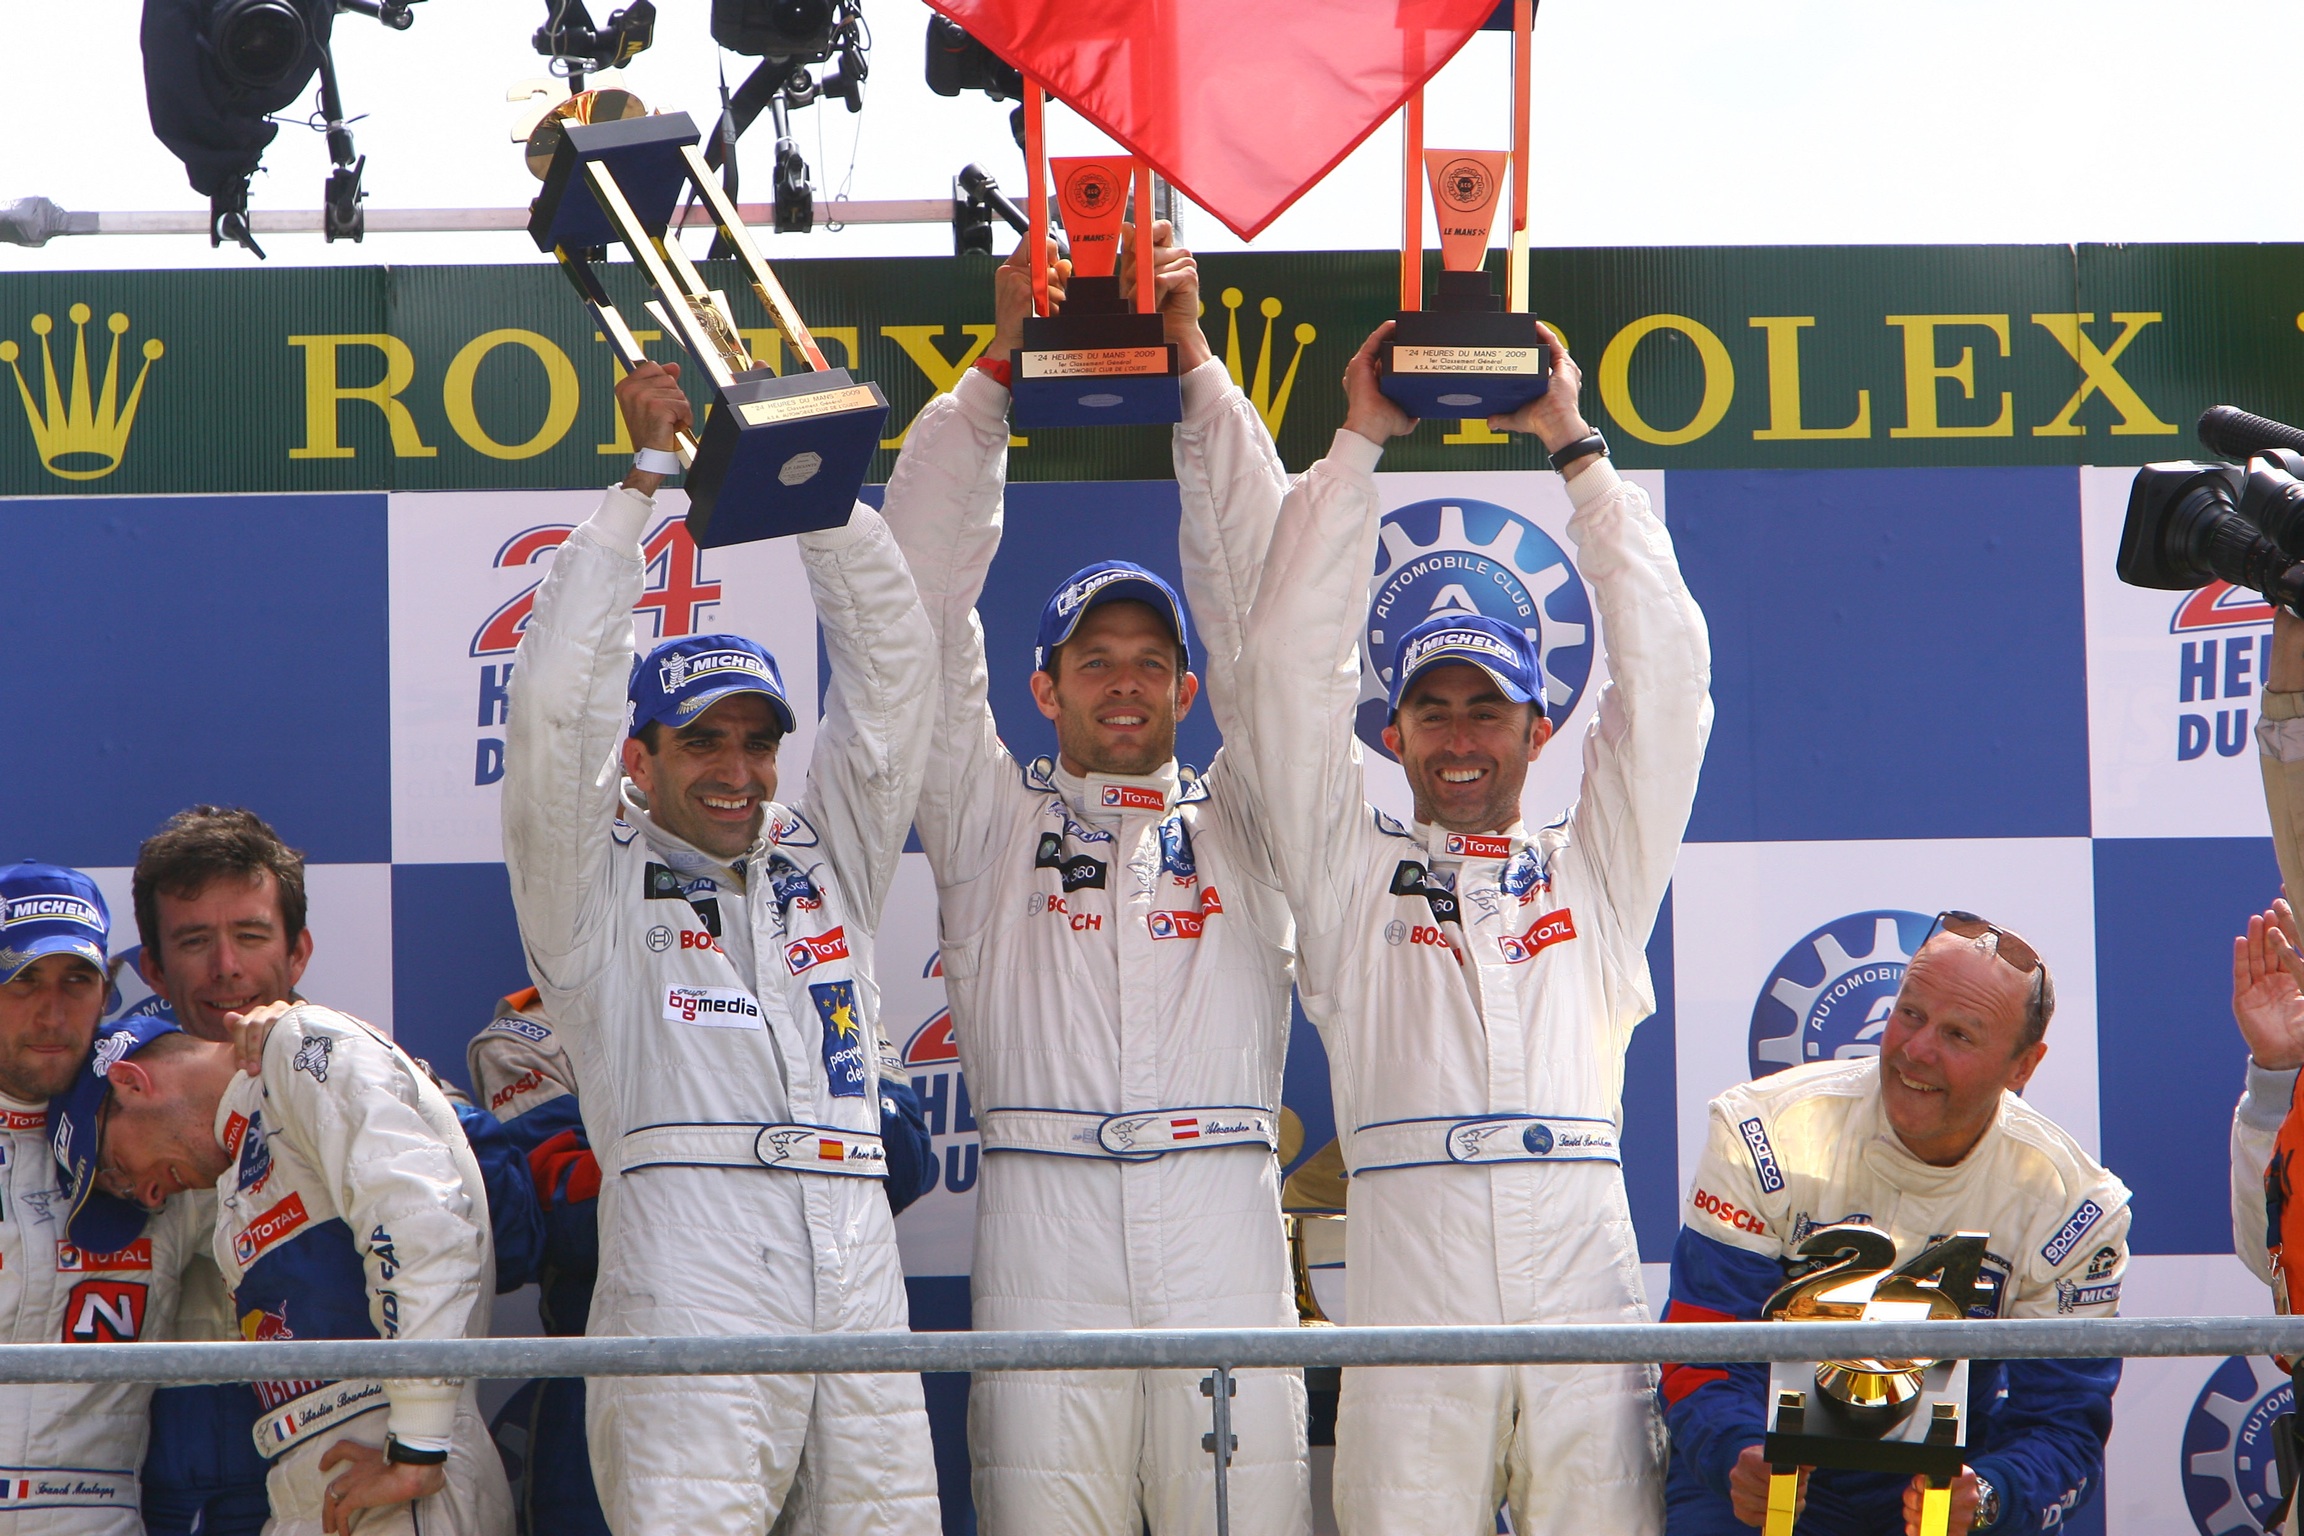 Brabham on the podium after winning the 2009 Le Mans 24 Hours with Peugeot